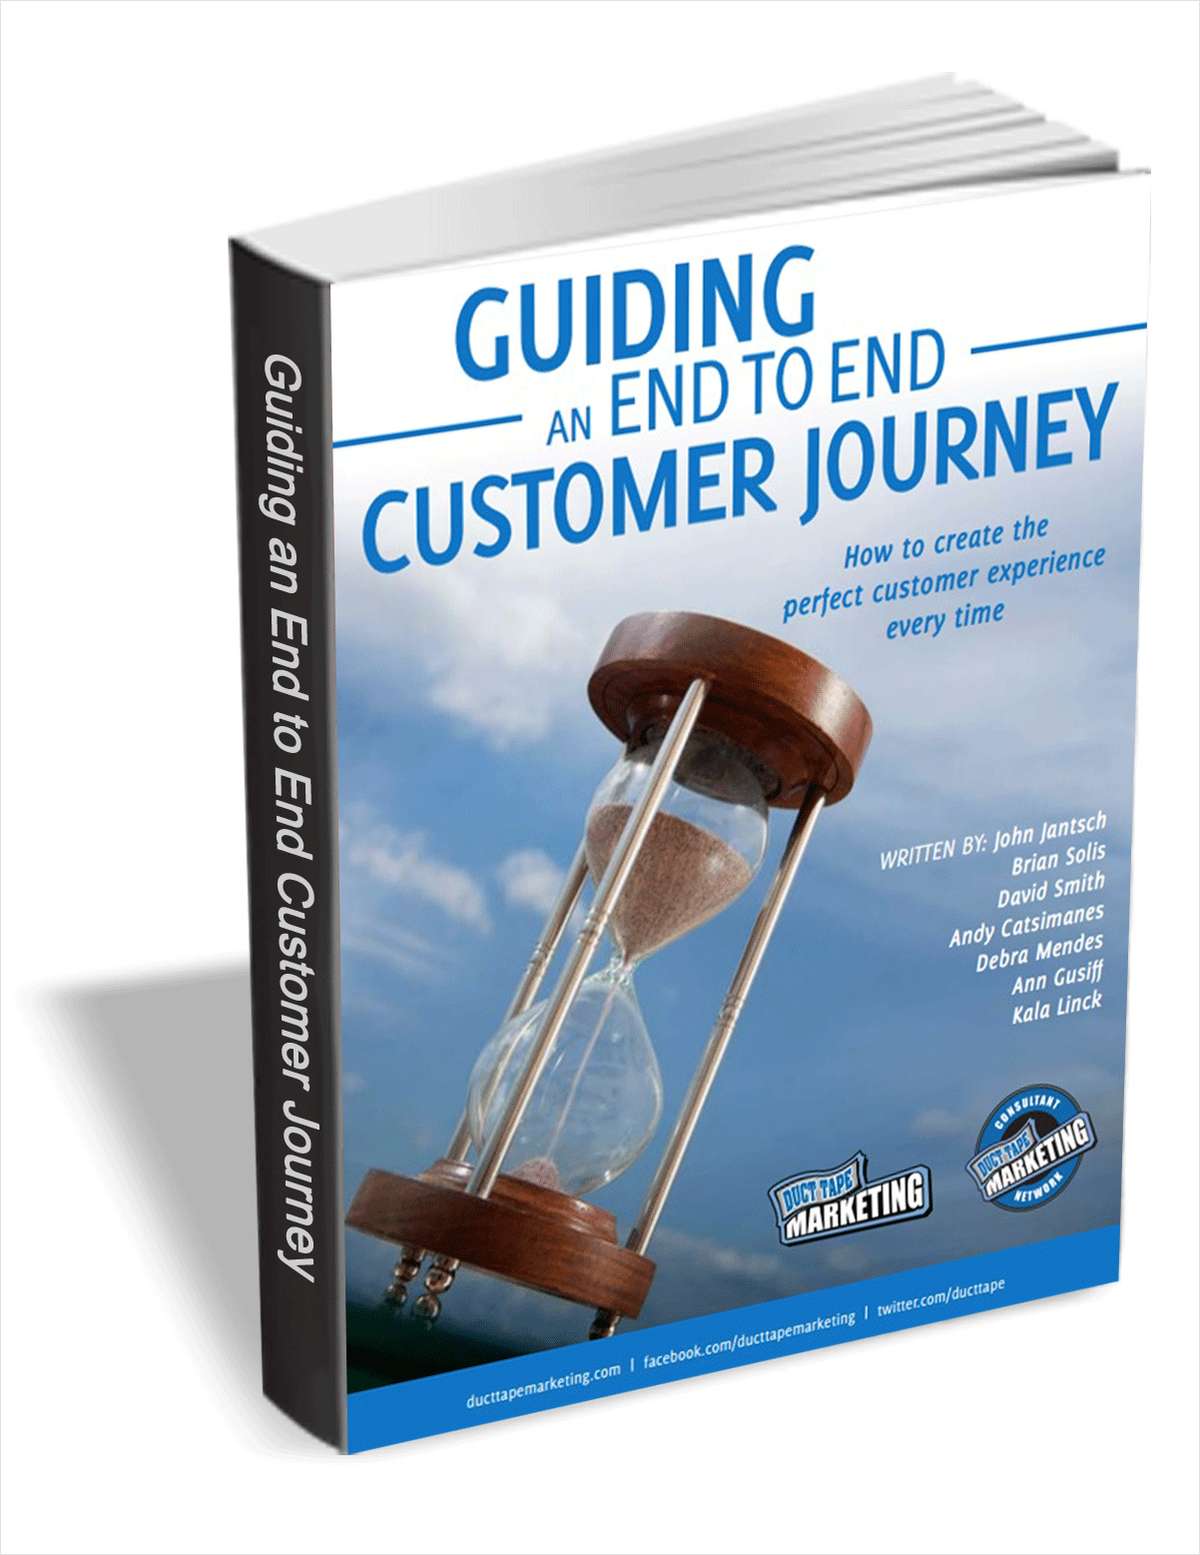 Guiding an End to End Customer Journey